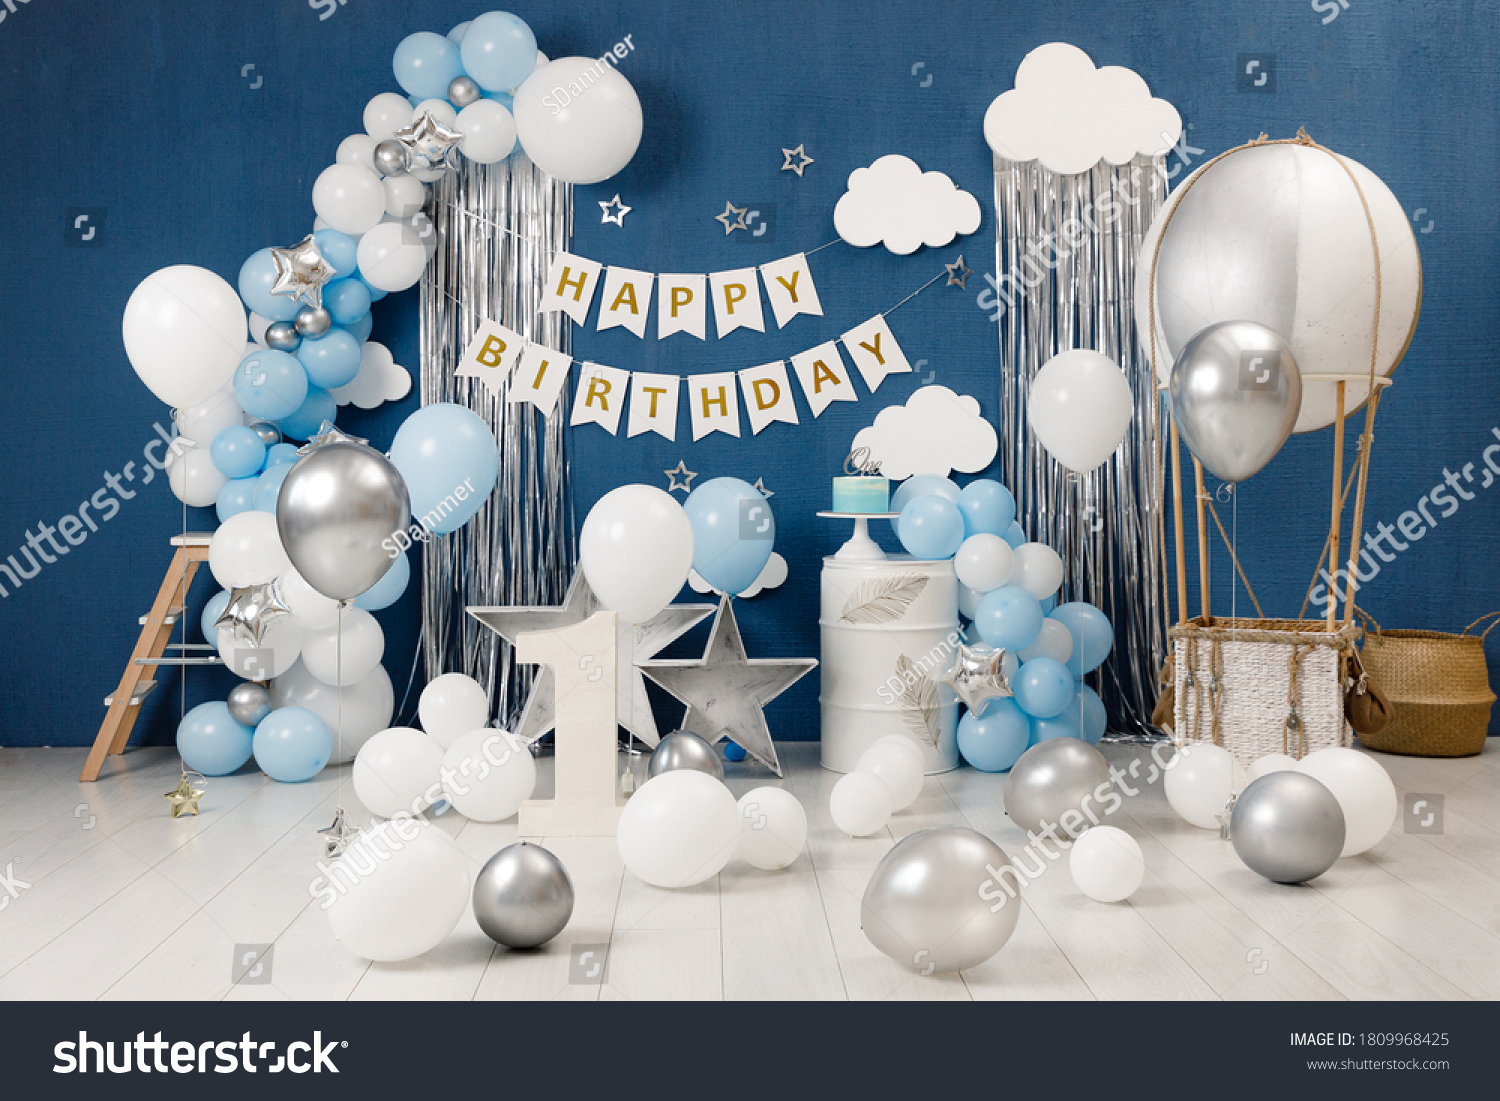 Birthday decorations - gifts, toys, balloons, garland and figure for little baby party on a blue wall background. #1809968425